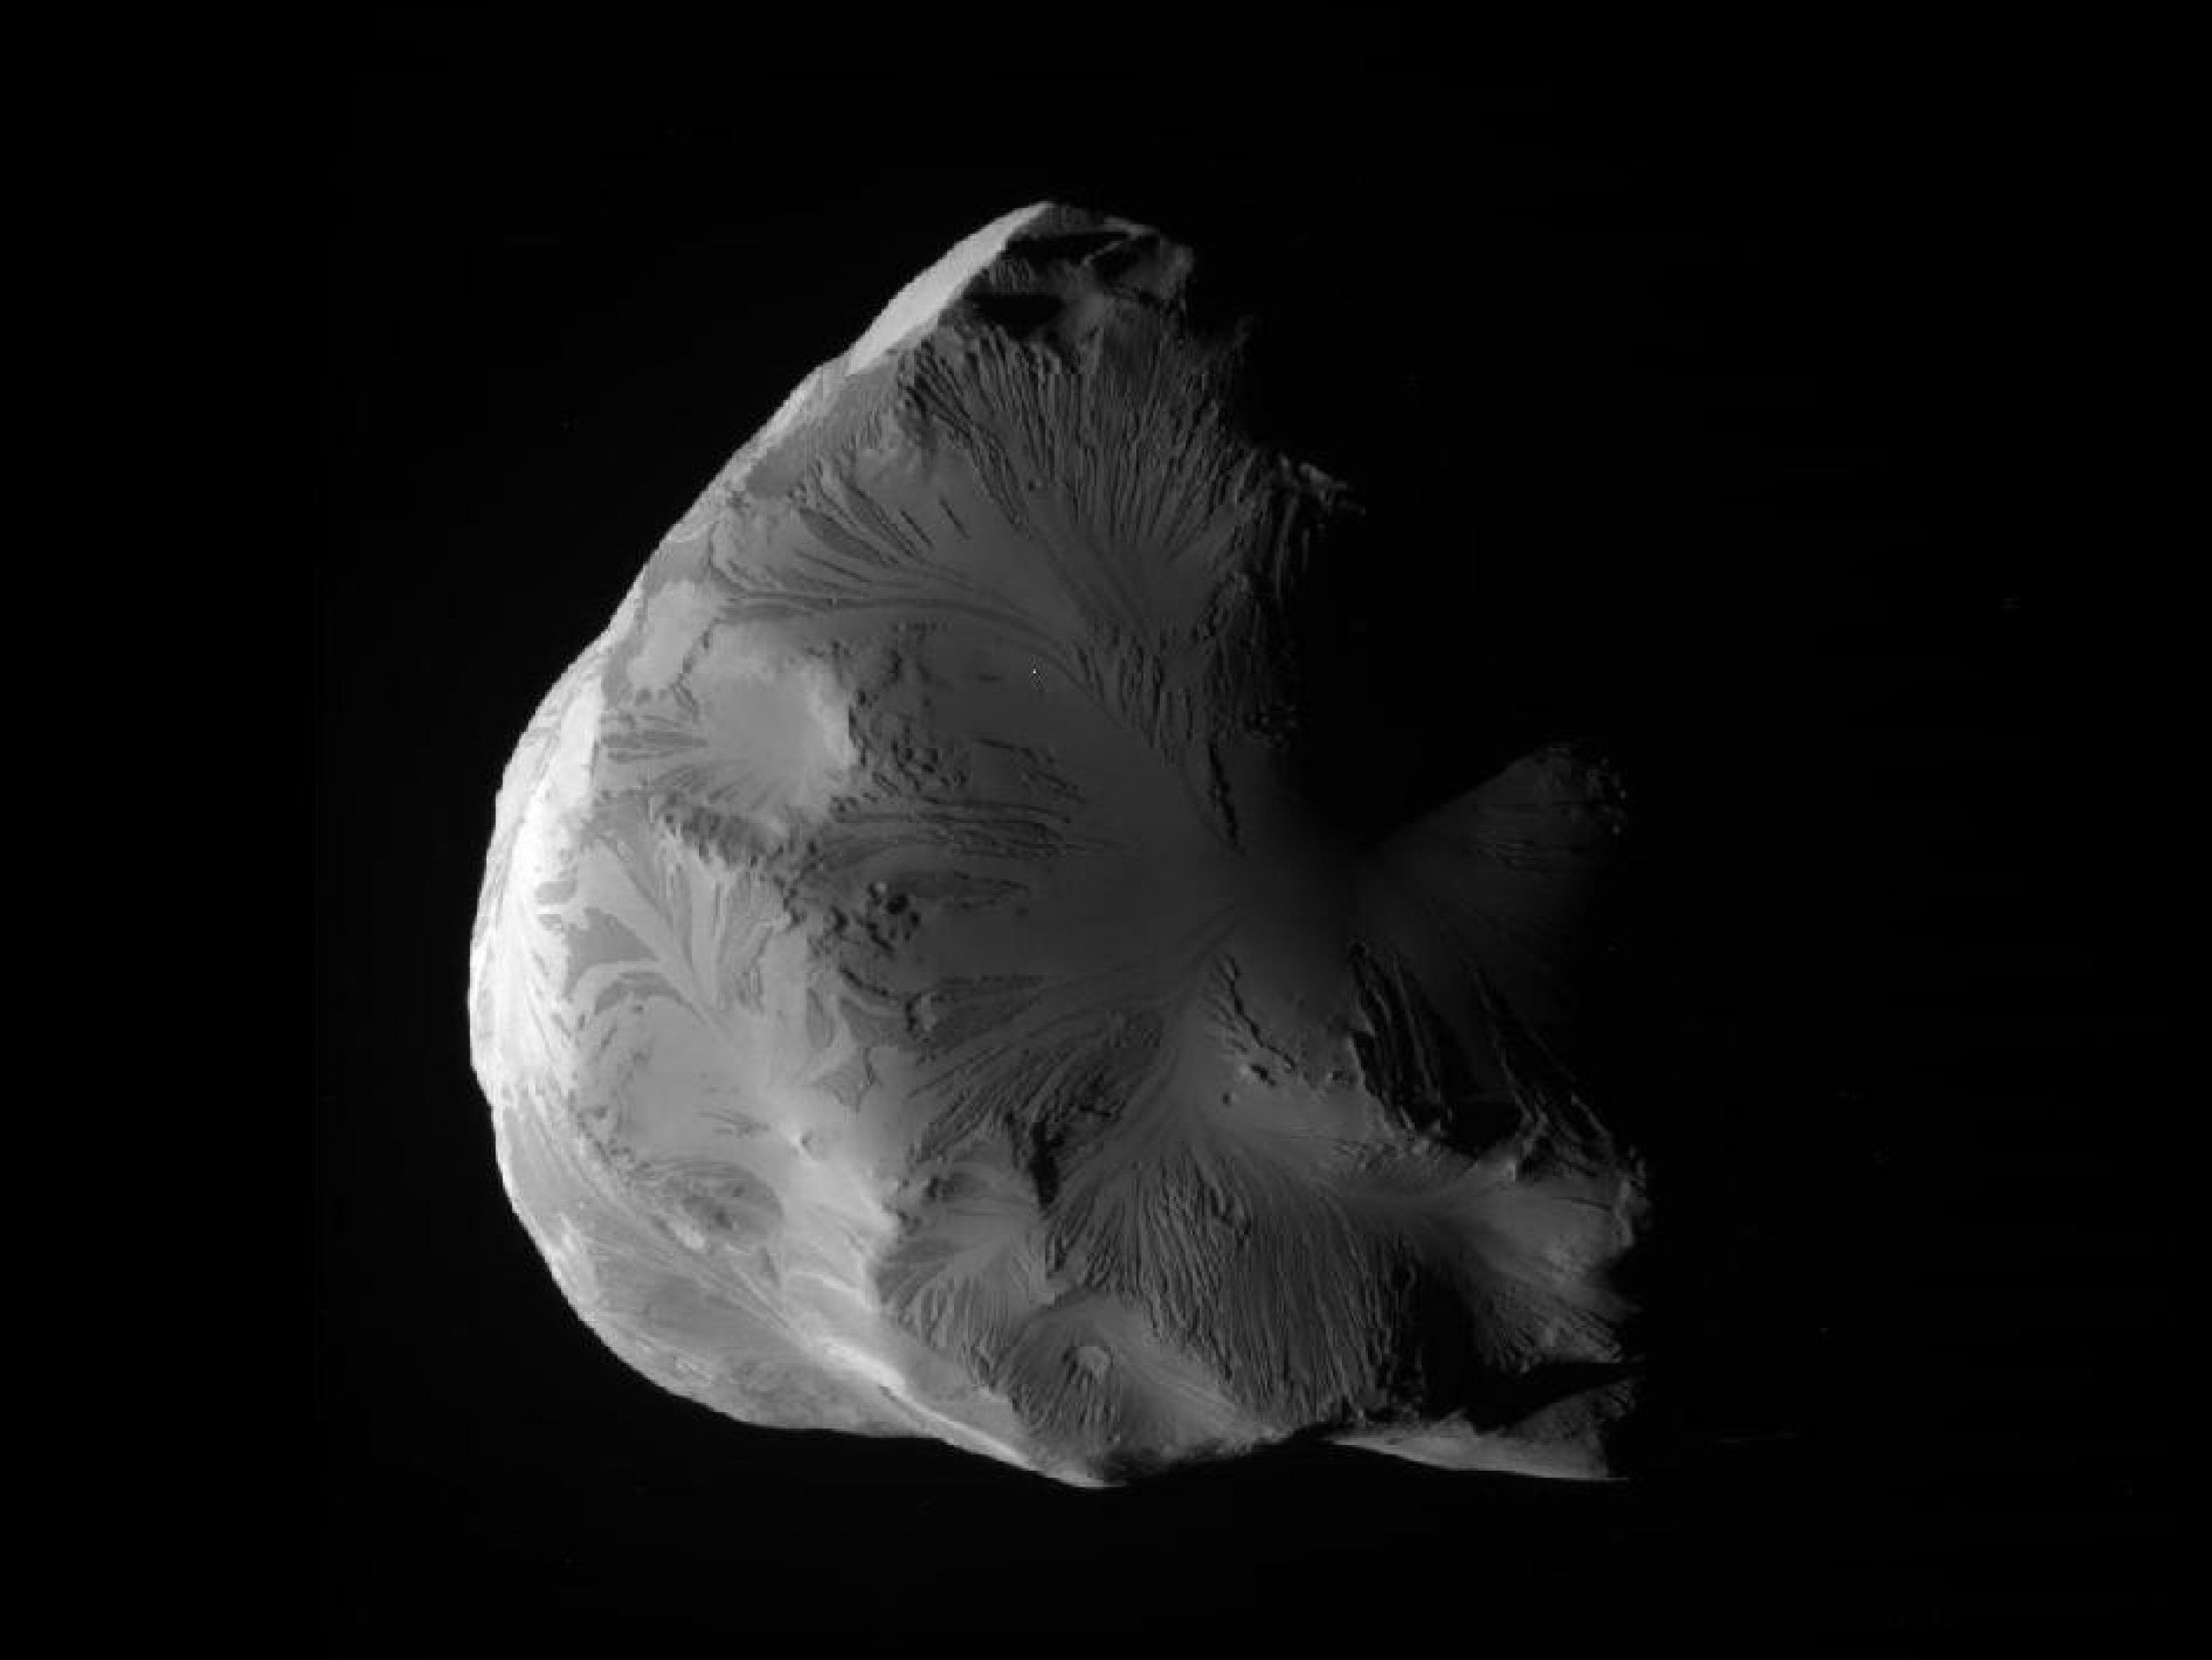 NASA039s Cassini spacecraft obtained this unprocessed image of Saturn039s moon Helene on June 18, 2011.